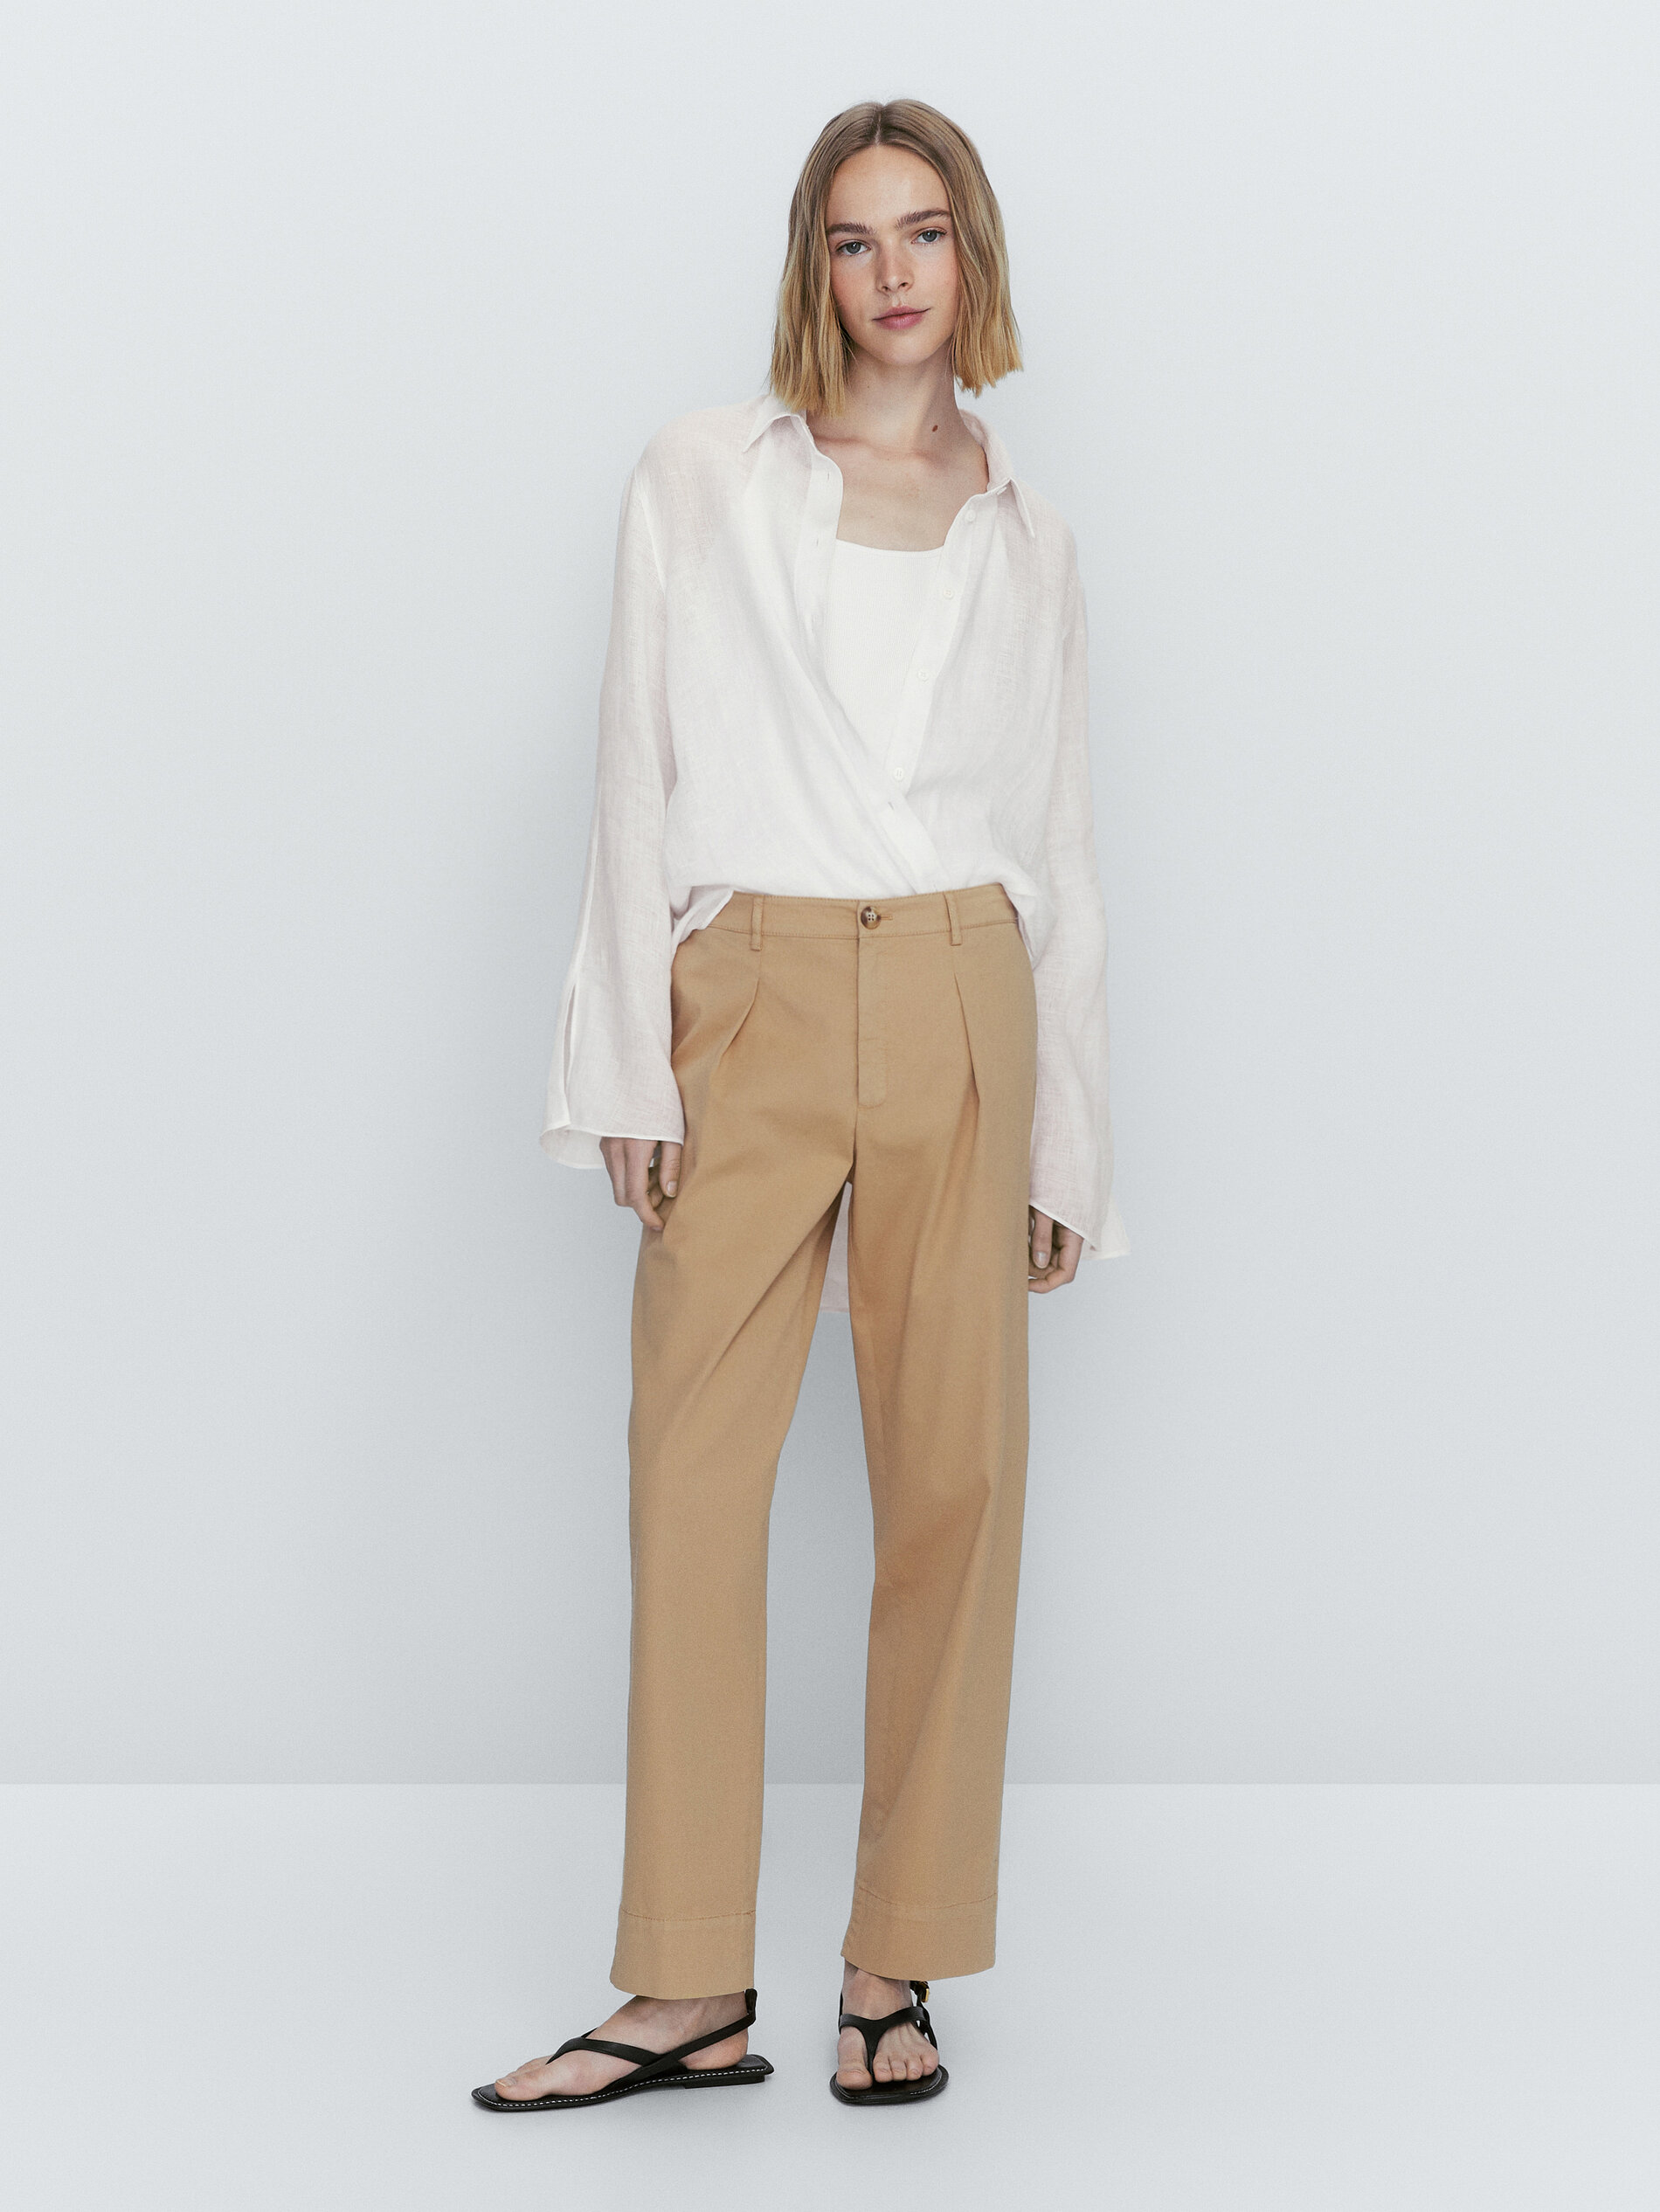 Clip-on pants , in camel - RODIER